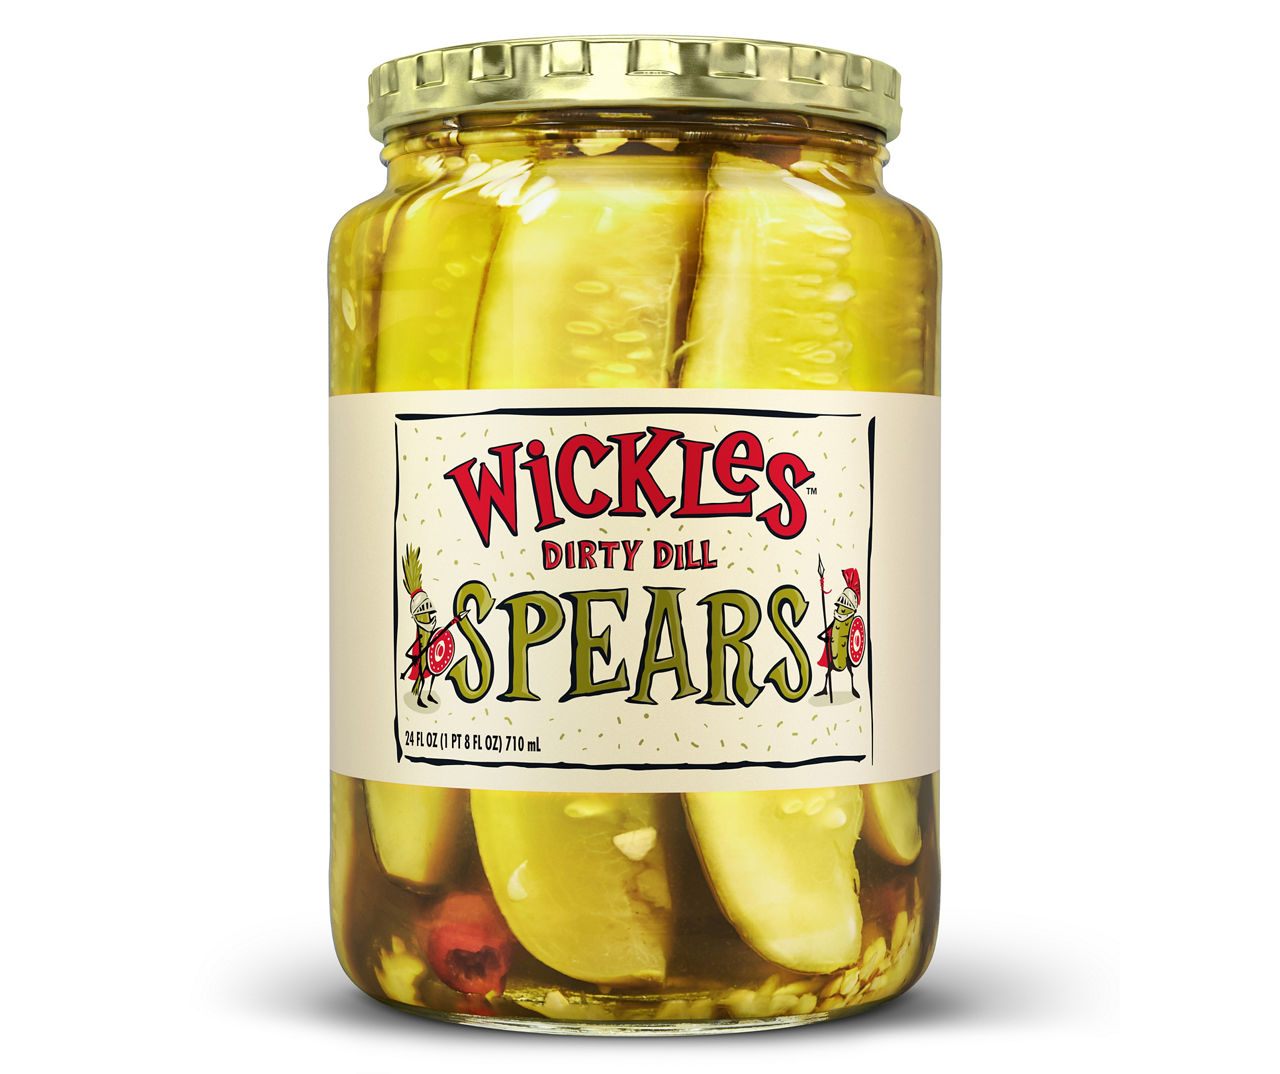 Wickles Pickles Wickles Dirty Dill Pickle Spears, 24 Oz.